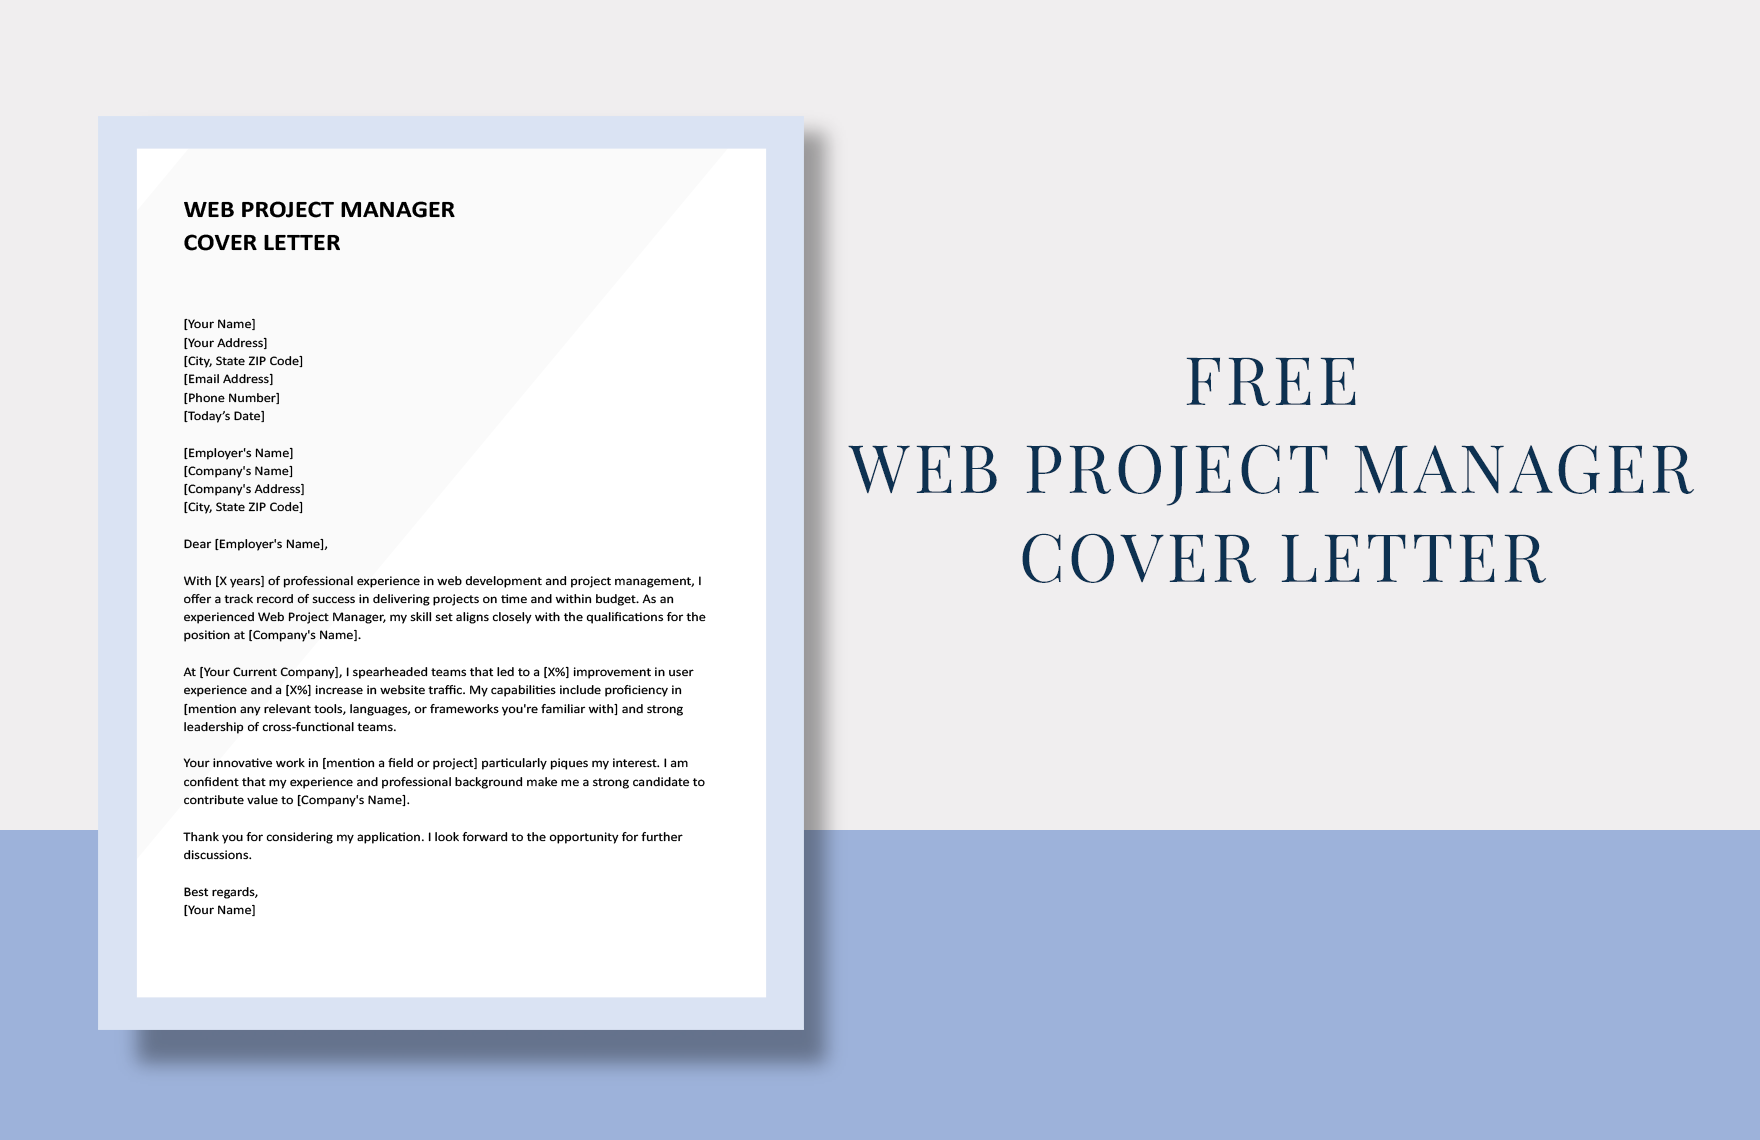 Web Project Manager Cover Letter